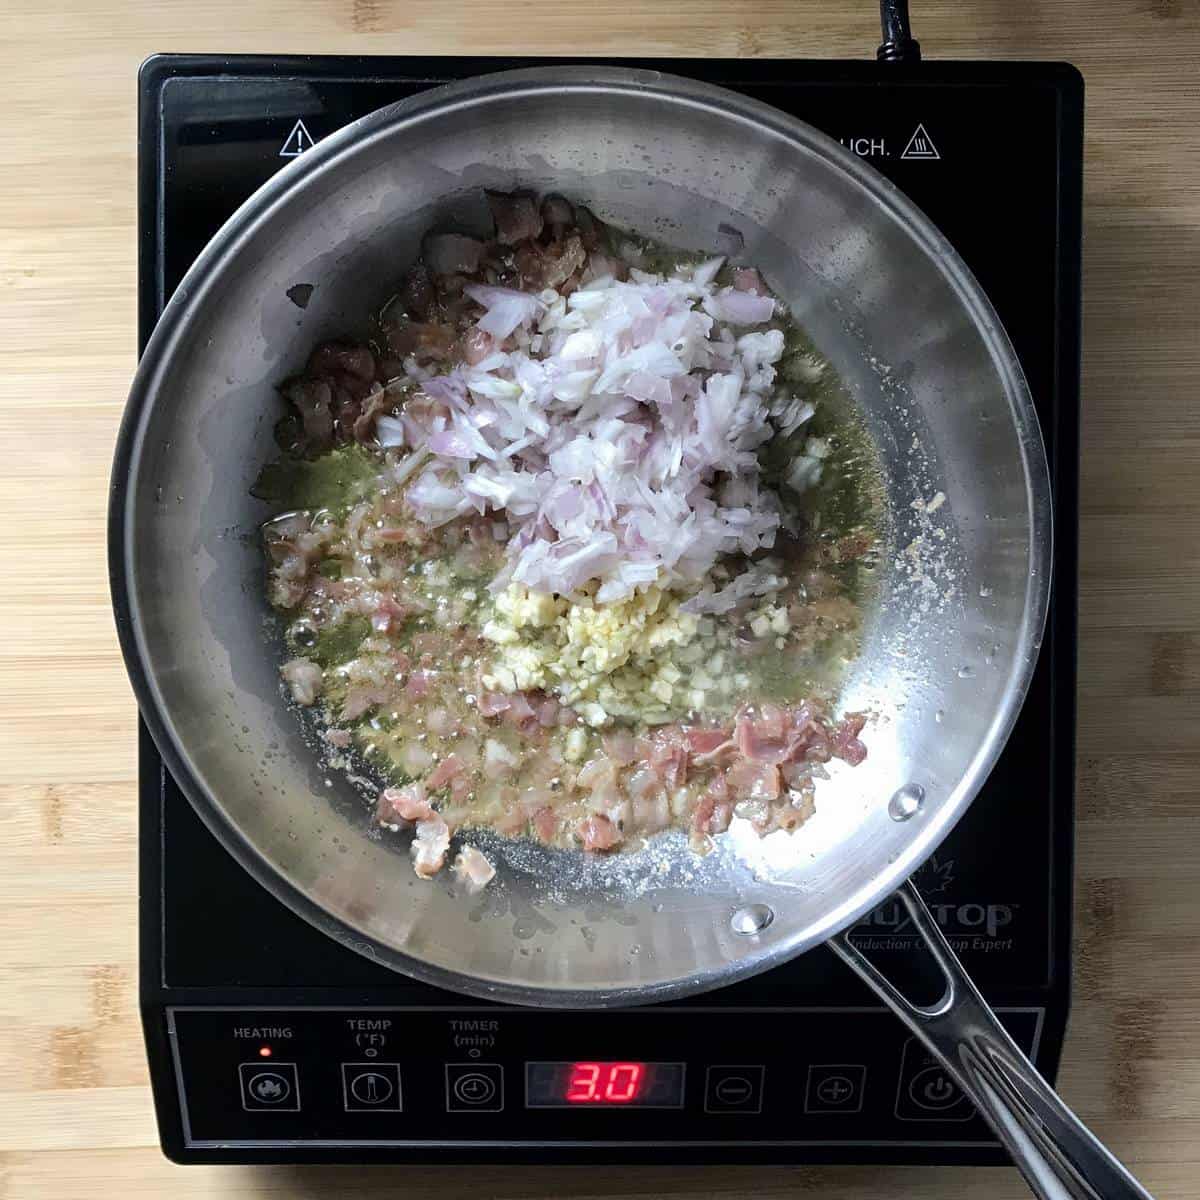 Garlic, onions and pancetta sauteed in a pan.